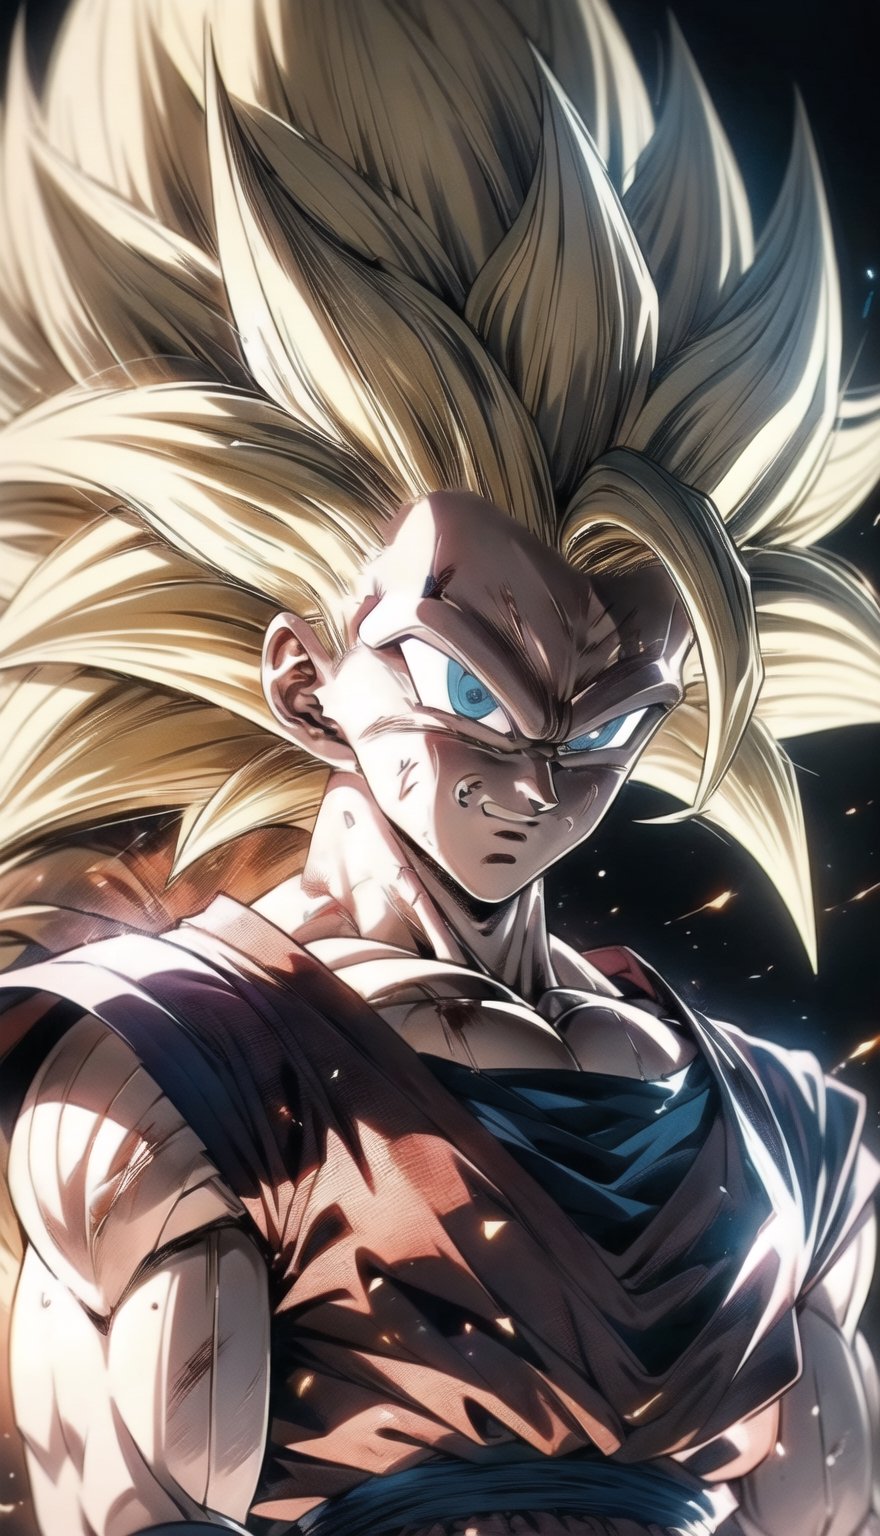 We can visualize the iconic character from the animated series Dragon Ball Z, Goku, in his super saiyan phase 3 transformation. (his extremely long, loose, yellow hair:1.9). (very very long hair:1.9). (without eyebrows, eyebrow alopecia:1.9). (total loss of eyebrow hair:1.9). blue eyes, with his characteristic orange suit. Flashes of light and electricity surround his entire body, a yellow glow. smiling, smug. His ki is immense and mystical. His look is wild. He is at the culmination of a great battle for the fate of planet Earth and you can see his wounded body. The image quality and details have to be worthy of one of the most famous characters in all of anime history and honor him as he deserves. which reflects the design style and details of the great Akira Toriyama. full body



PNG image format, sharp lines and borders, solid blocks of colors, over 300ppp dots per inch, 32k ultra high definition, 530MP, Fujifilm XT3, cinematographic, (anime:1.6), 4D, High definition RAW color professional photos, photo, masterpiece, realistic, ProRAW, realism, photorealism, high contrast, digital art trending on Artstation ultra high definition detailed realistic, detailed, skin texture, hyper detailed, realistic skin texture, facial features, armature, best quality, ultra high res, high resolution, detailed, raw photo, sharp re, lens rich colors hyper realistic lifelike texture dramatic lighting unrealengine trending, ultra sharp, pictorial technique, (sharpness, definition and photographic precision), (contrast, depth and harmonious light details), (features, proportions, colors and textures at their highest degree of realism), (blur background, clean and uncluttered visual aesthetics, sense of depth and dimension, professional and polished look of the image), work of beauty and complexity. perfectly symmetrical body.
(aesthetic + beautiful + harmonic:1.5), (ultra detailed face, ultra detailed perfect eyes, ultra detailed mouth, ultra detailed body, ultra detailed perfect hands, ultra detailed clothes, ultra detailed background, ultra detailed scenery:1.5),



detail_master_XL:0.9,SDXLanime:0.8,LineAniRedmondV2-Lineart-LineAniAF:0.8,EpicAnimeDreamscapeXL:0.8,ManimeSDXL:0.8,Midjourney_Style_Special_Edition_0001:0.8,animeoutlineV4_16:0.8,perfect_light_colors:0.8,SAIYA,Super saiyan 3,yuzu2:0.3